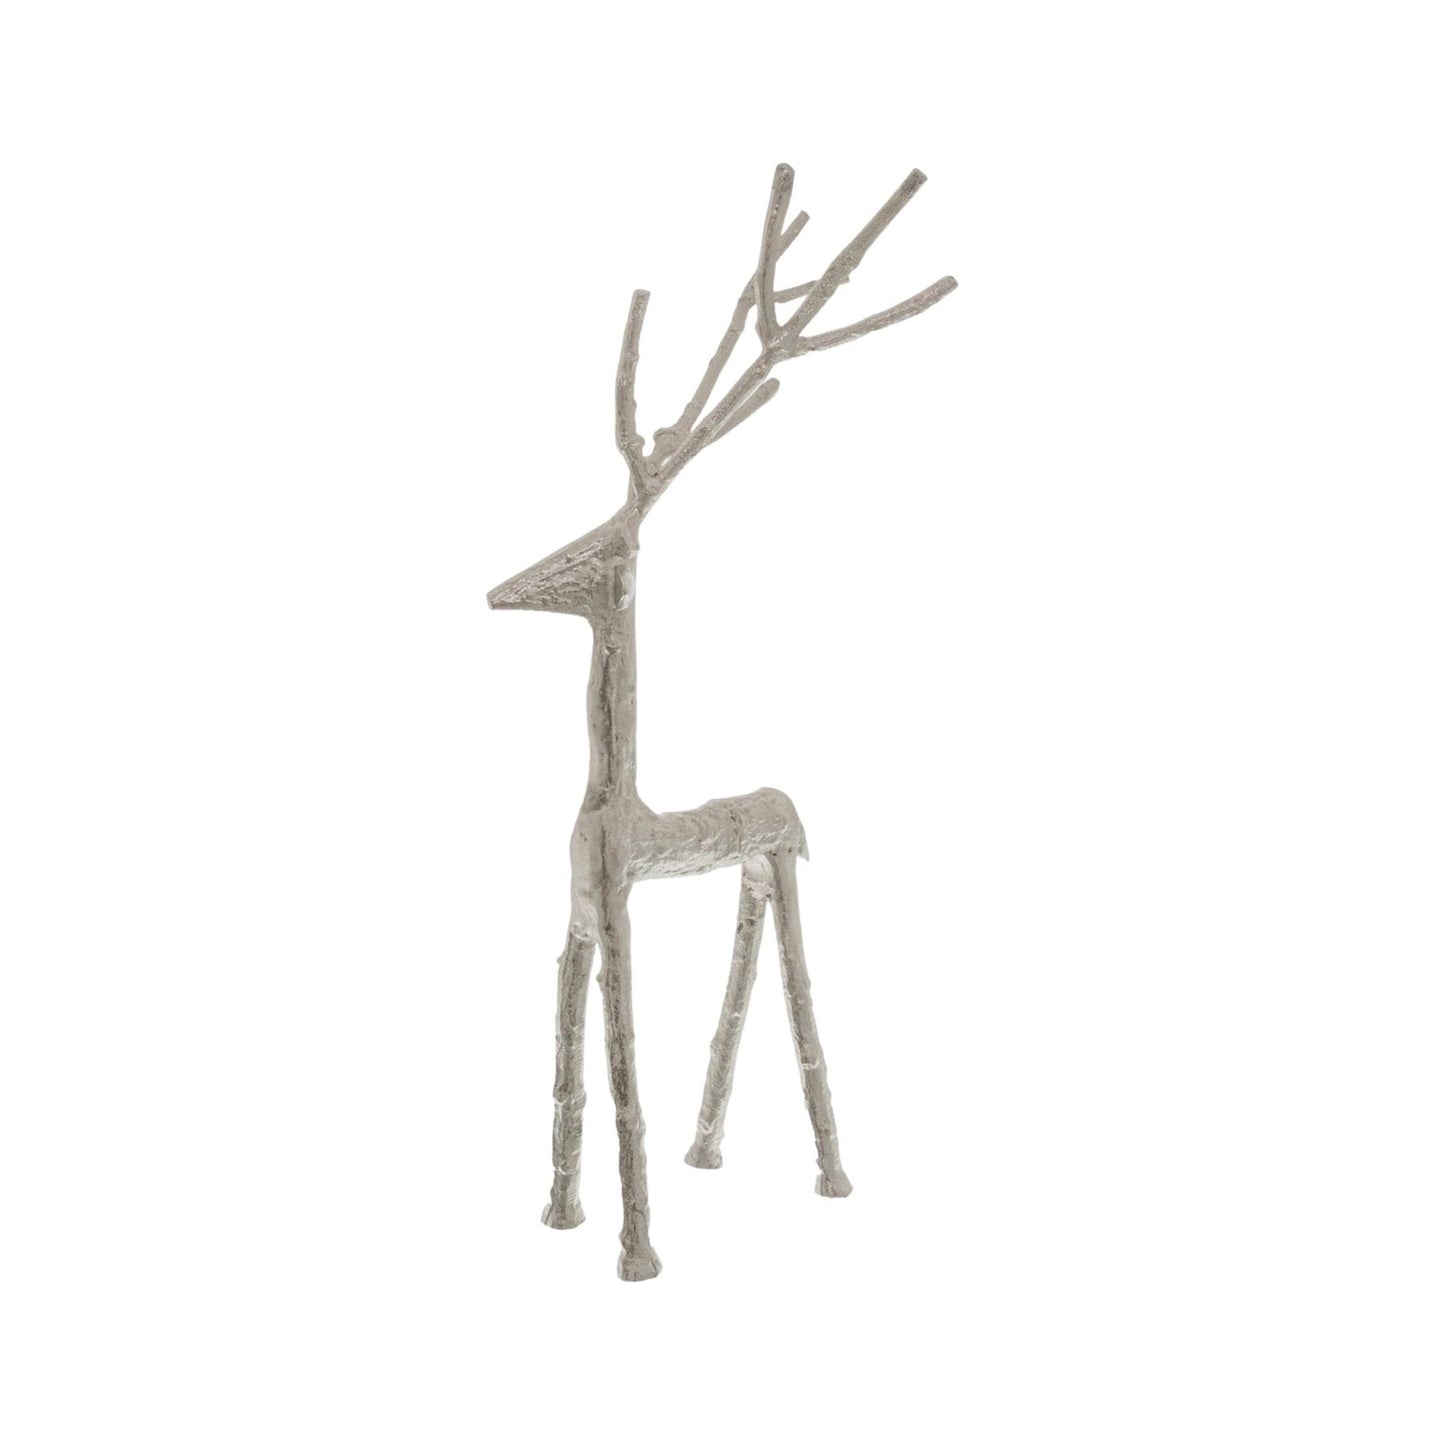 Small Silver Standing Stag Ornament - Ashton and Finch